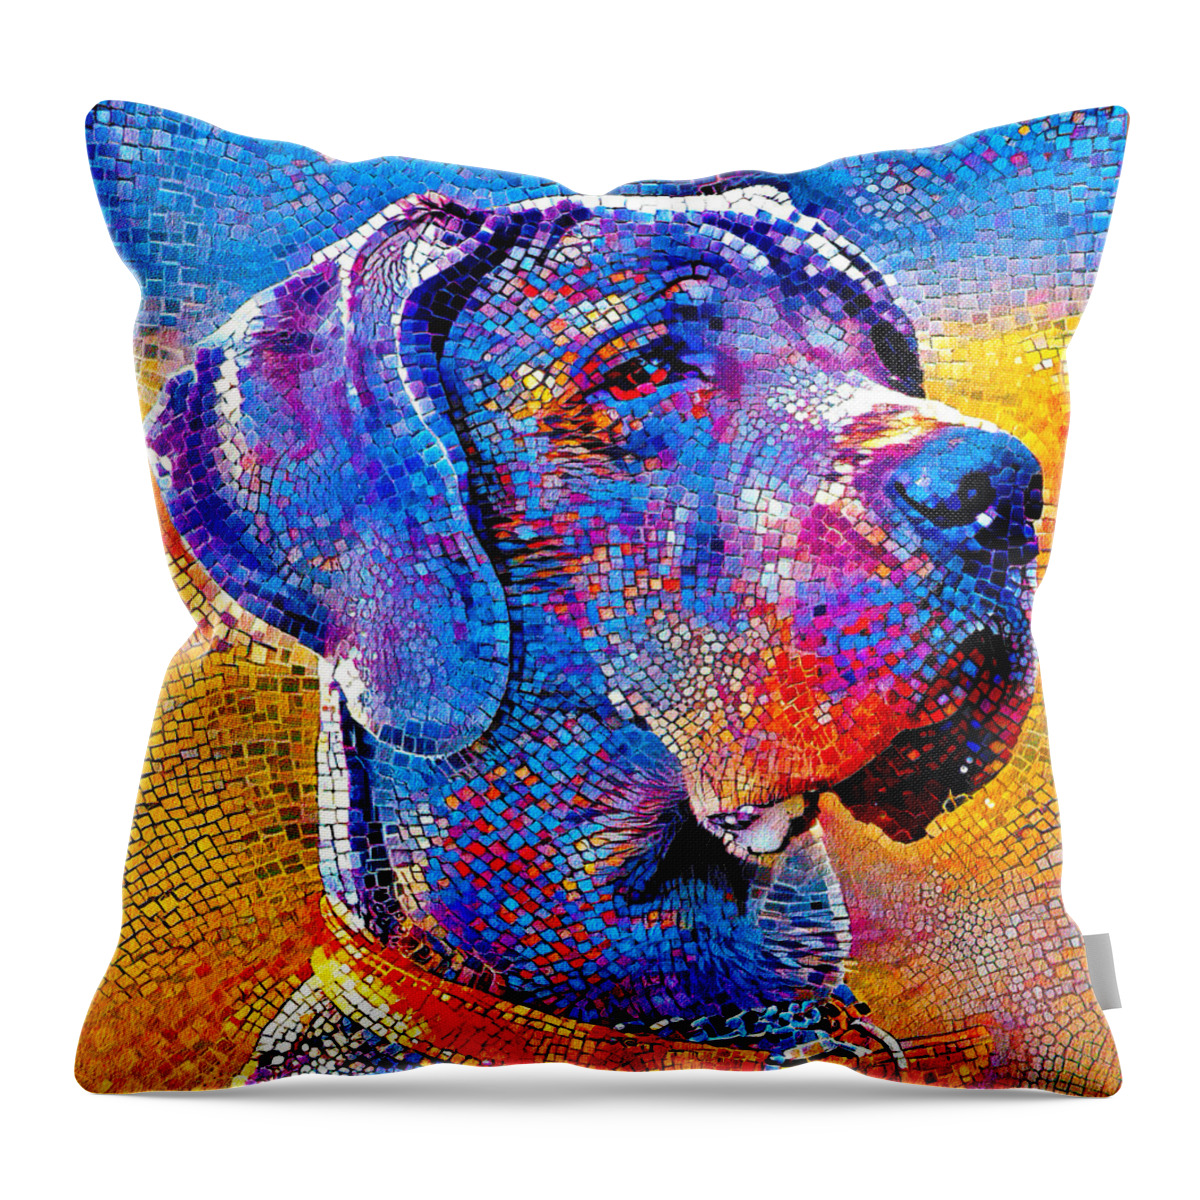 Great Dane Throw Pillow featuring the digital art Great Dane portrait - colorful mosaic by Nicko Prints